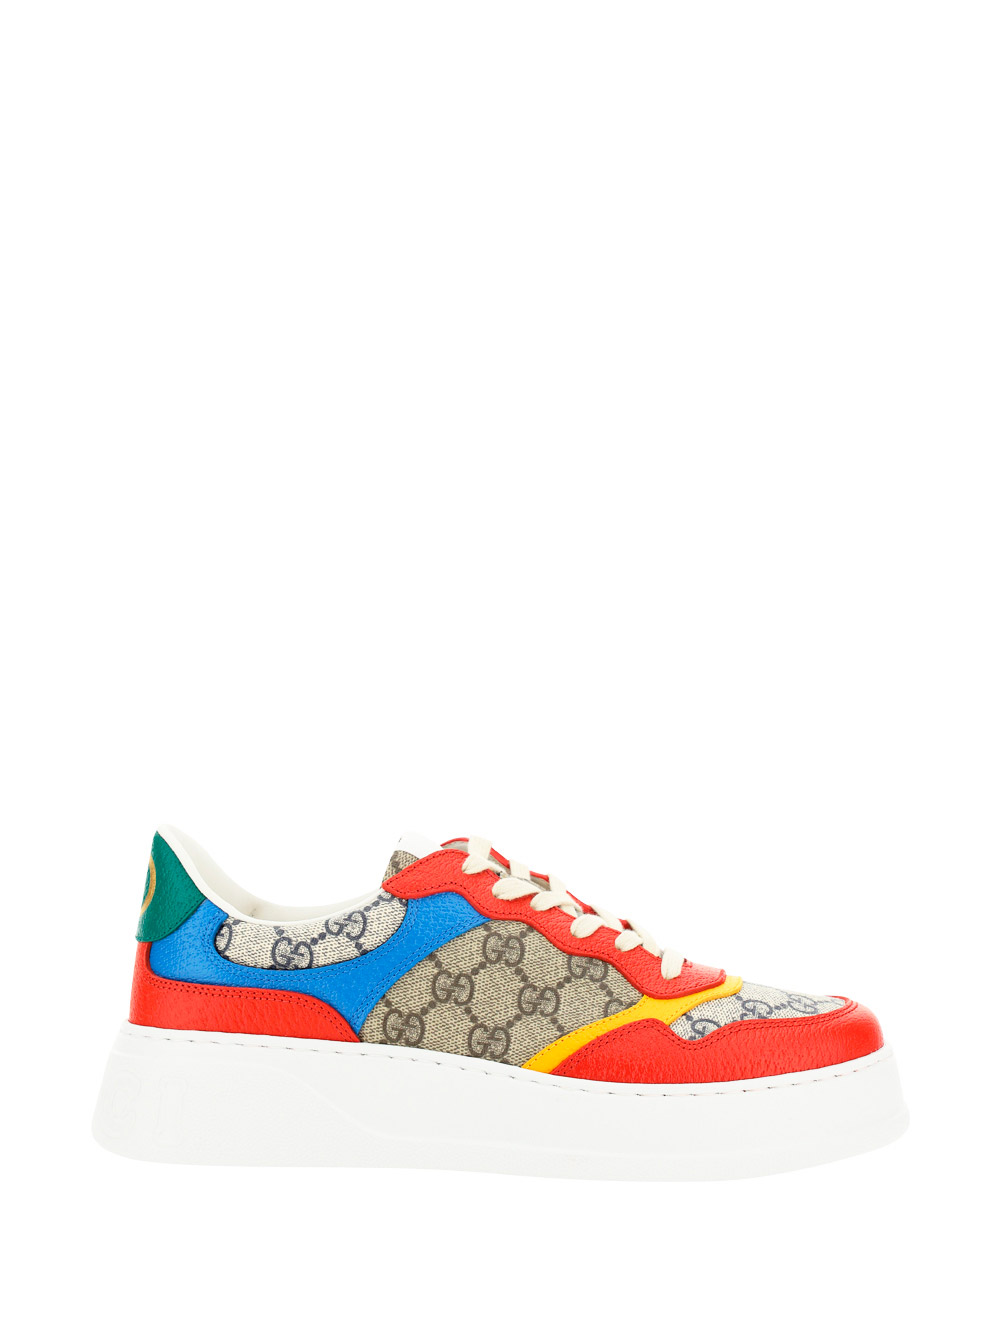 Actuator Helm Mis Gucci Sneakers In Beige-bl/l.red/be.eb | ModeSens